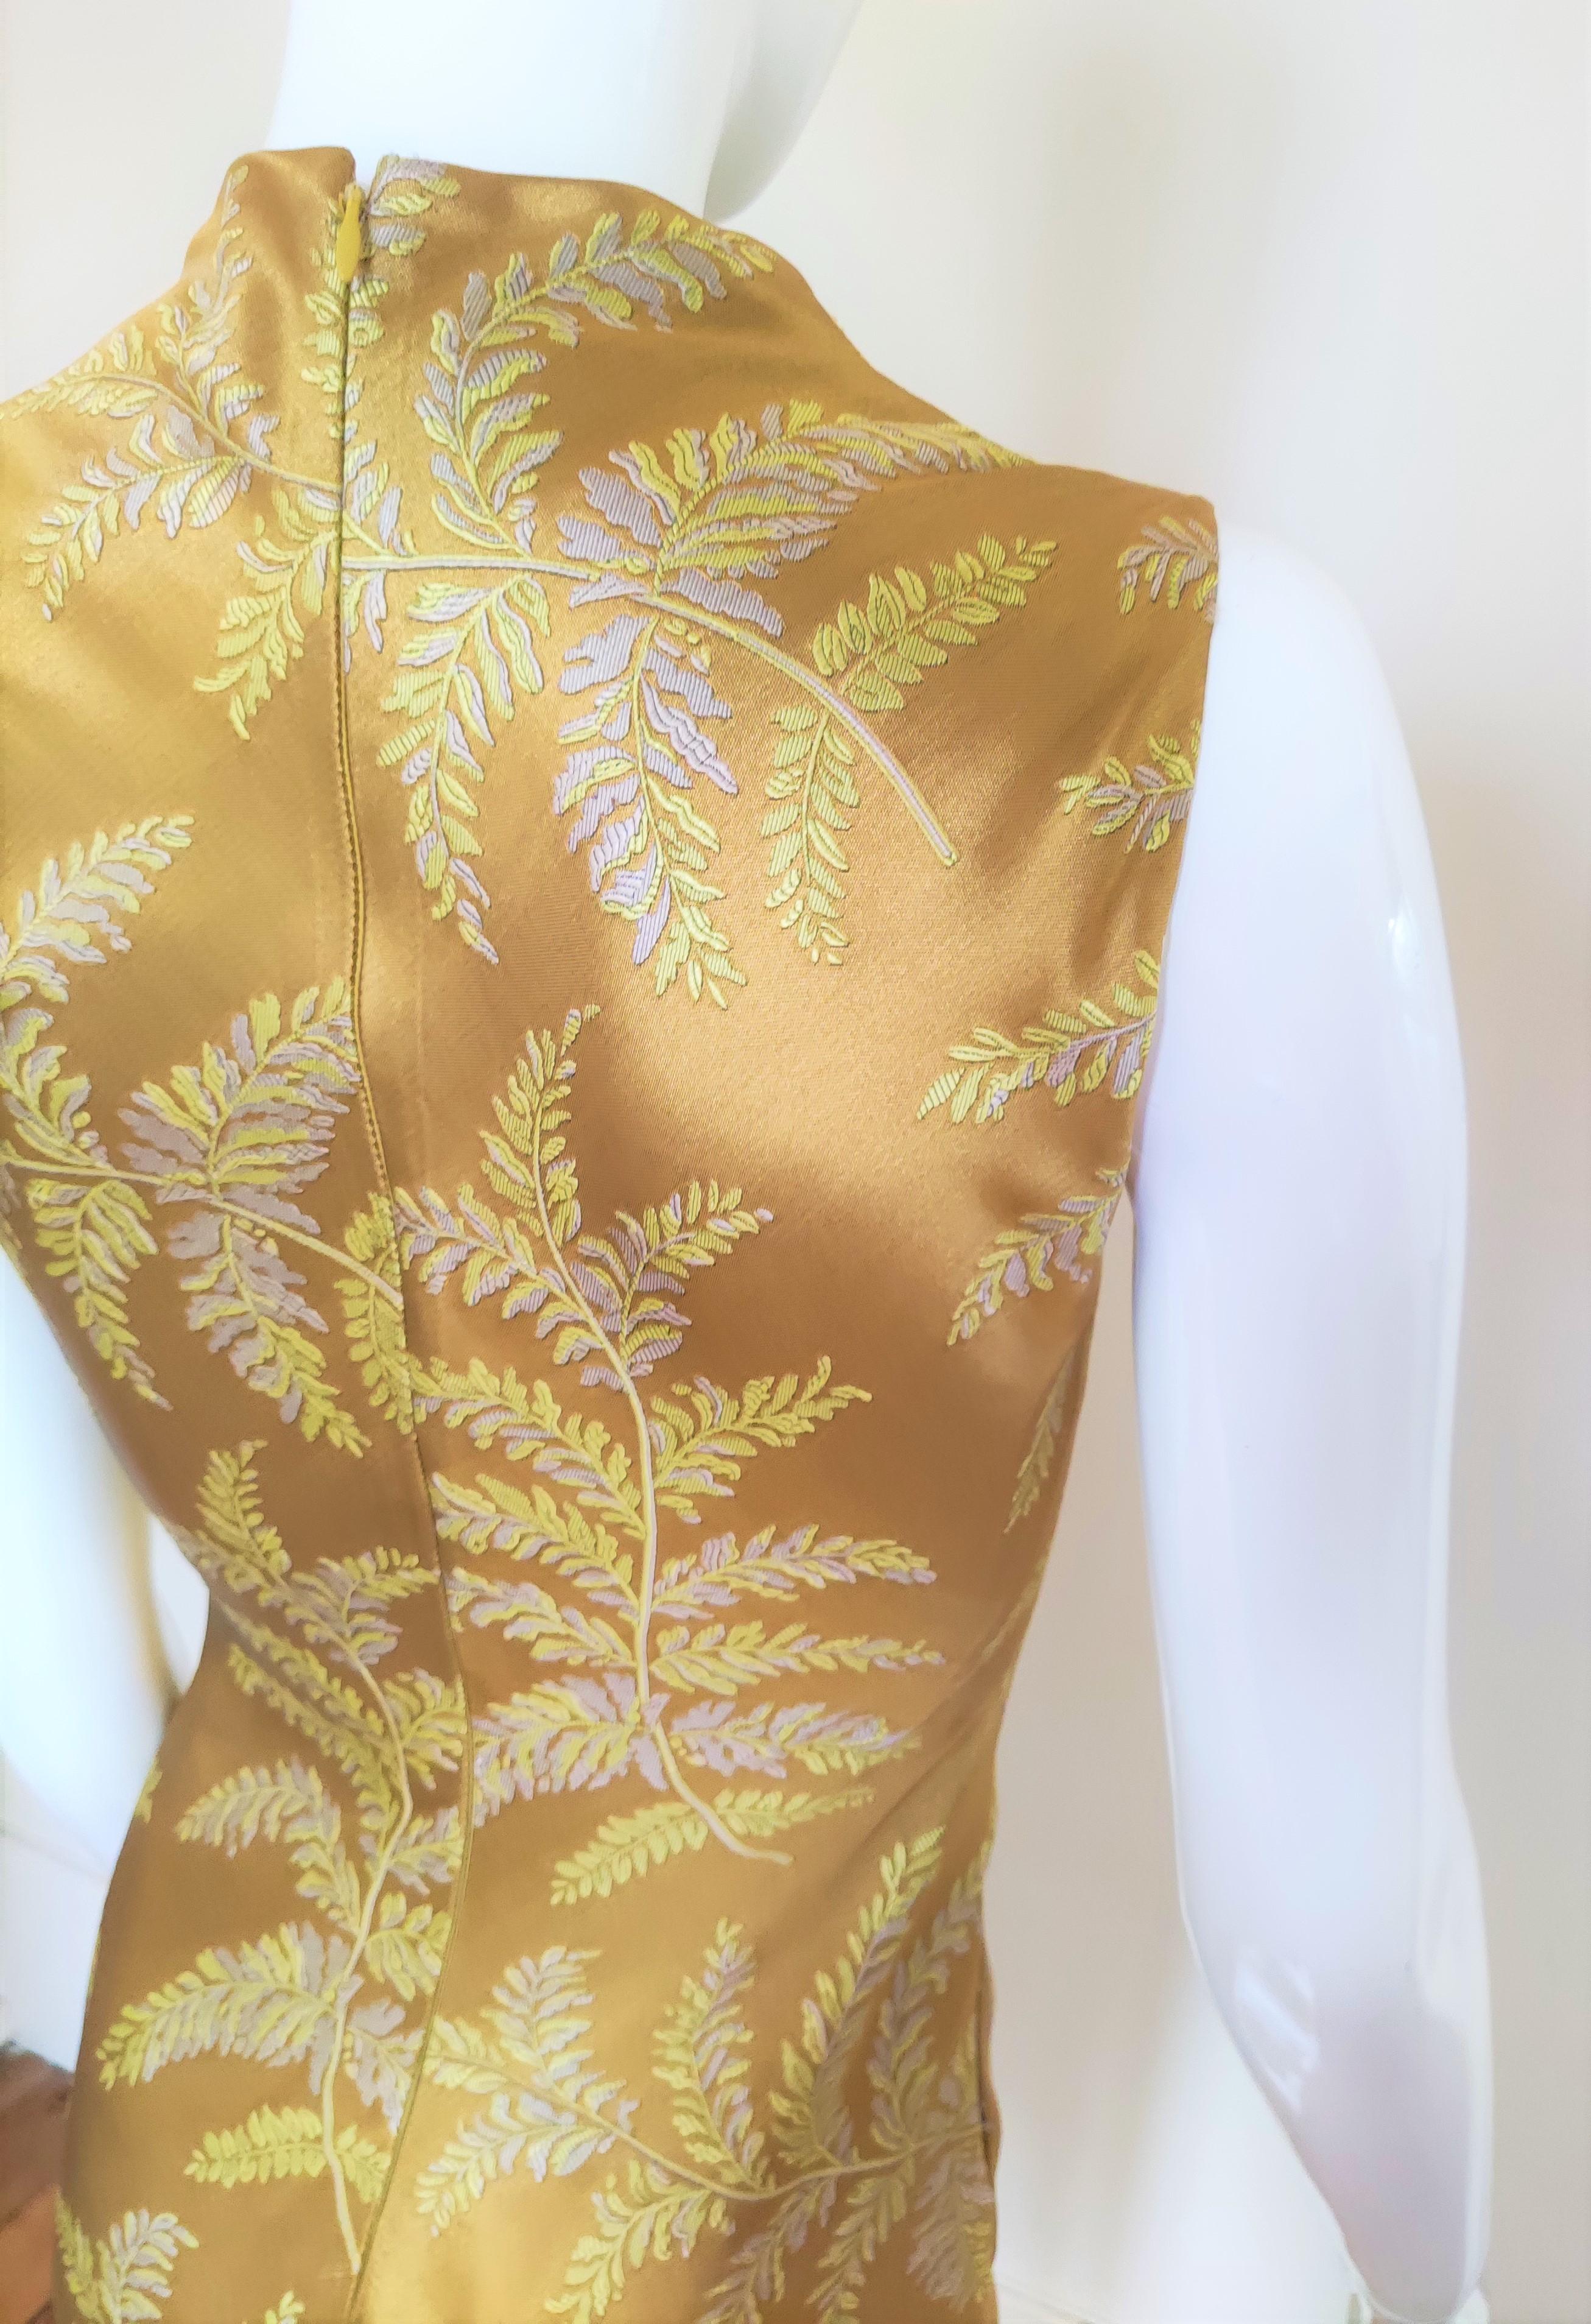 Atelier Gianni Versace Silk Mustard Yellow Floral Leaf Evening Baroque Dress For Sale 2